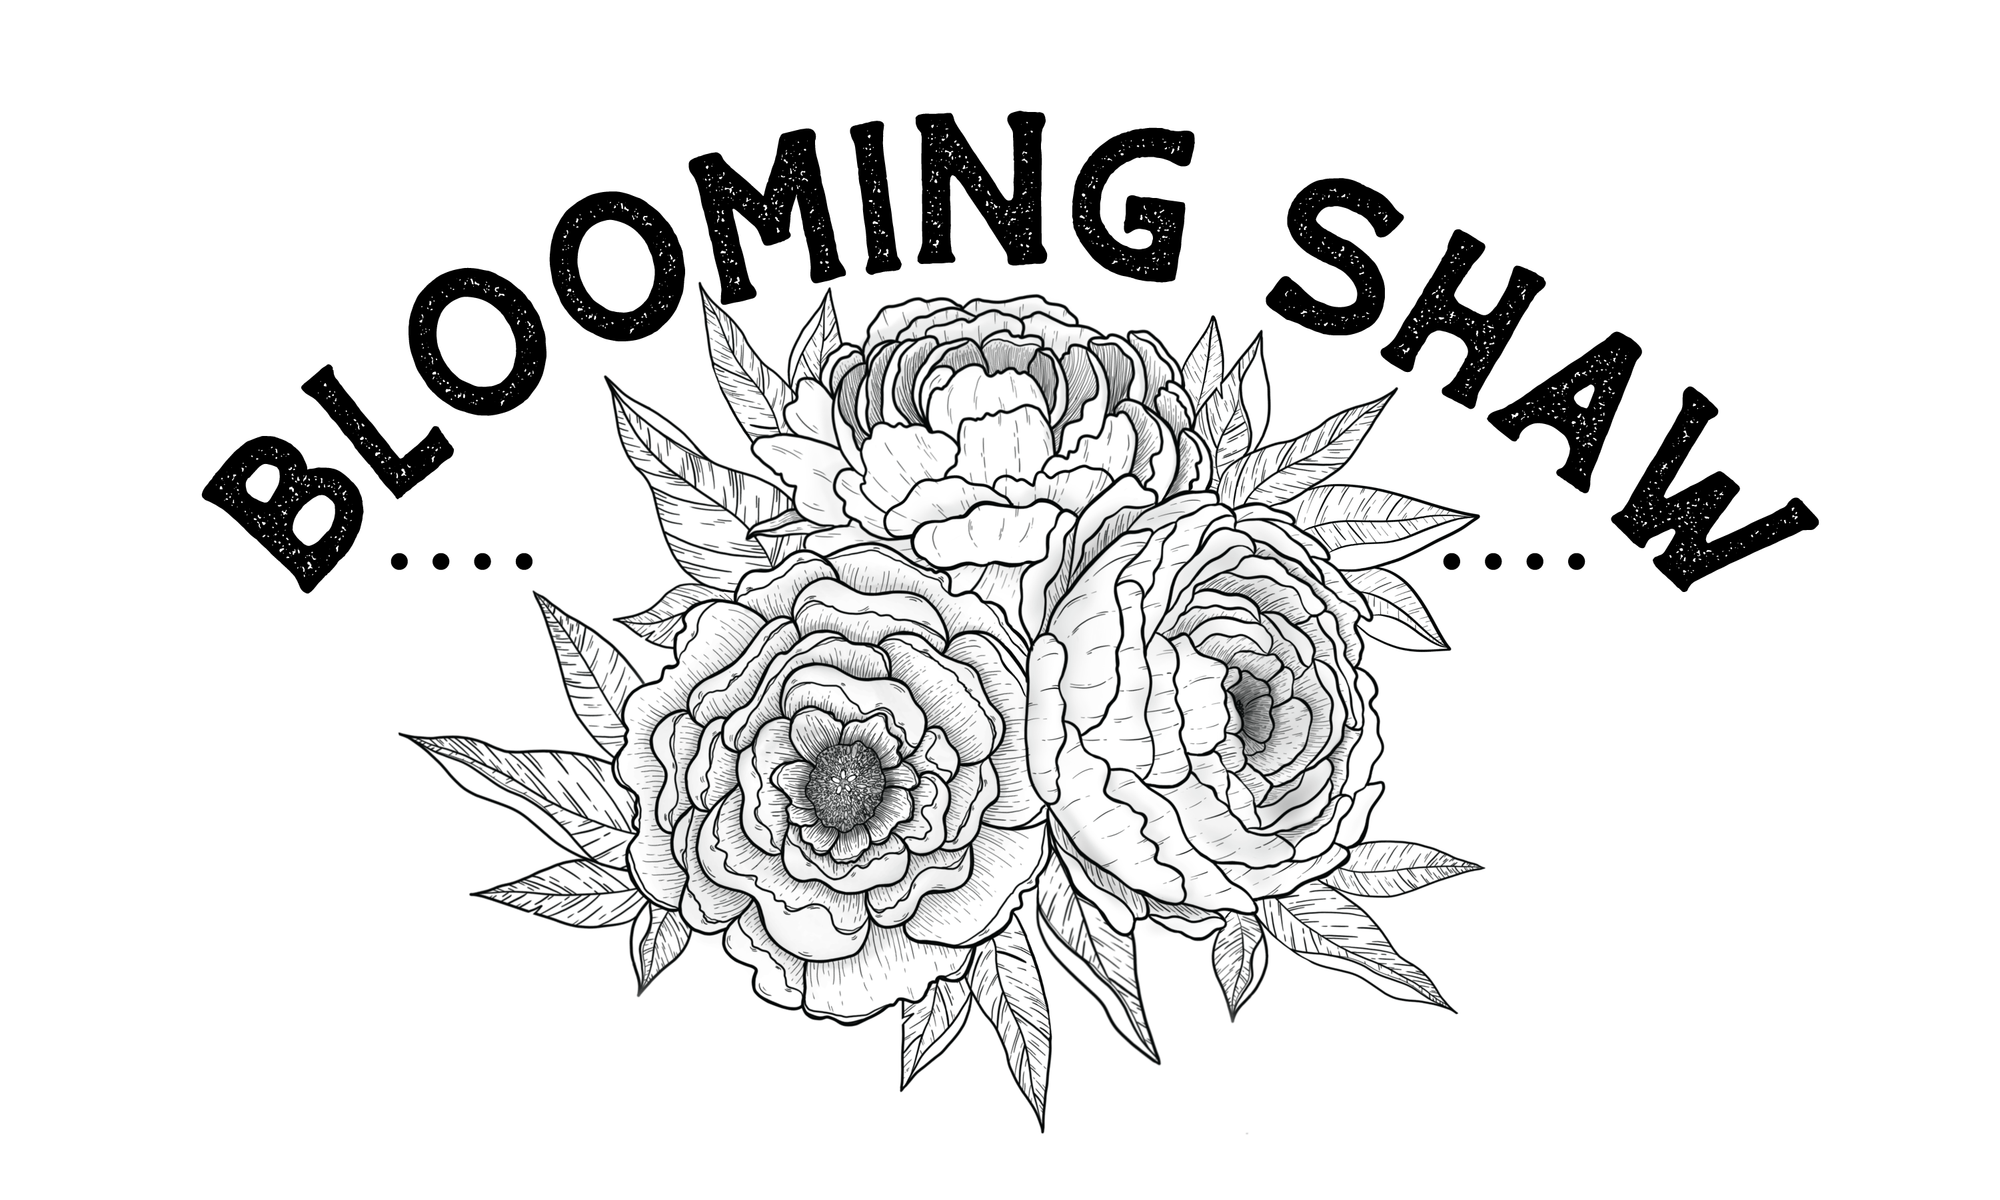 Designs by Blooming Shaw